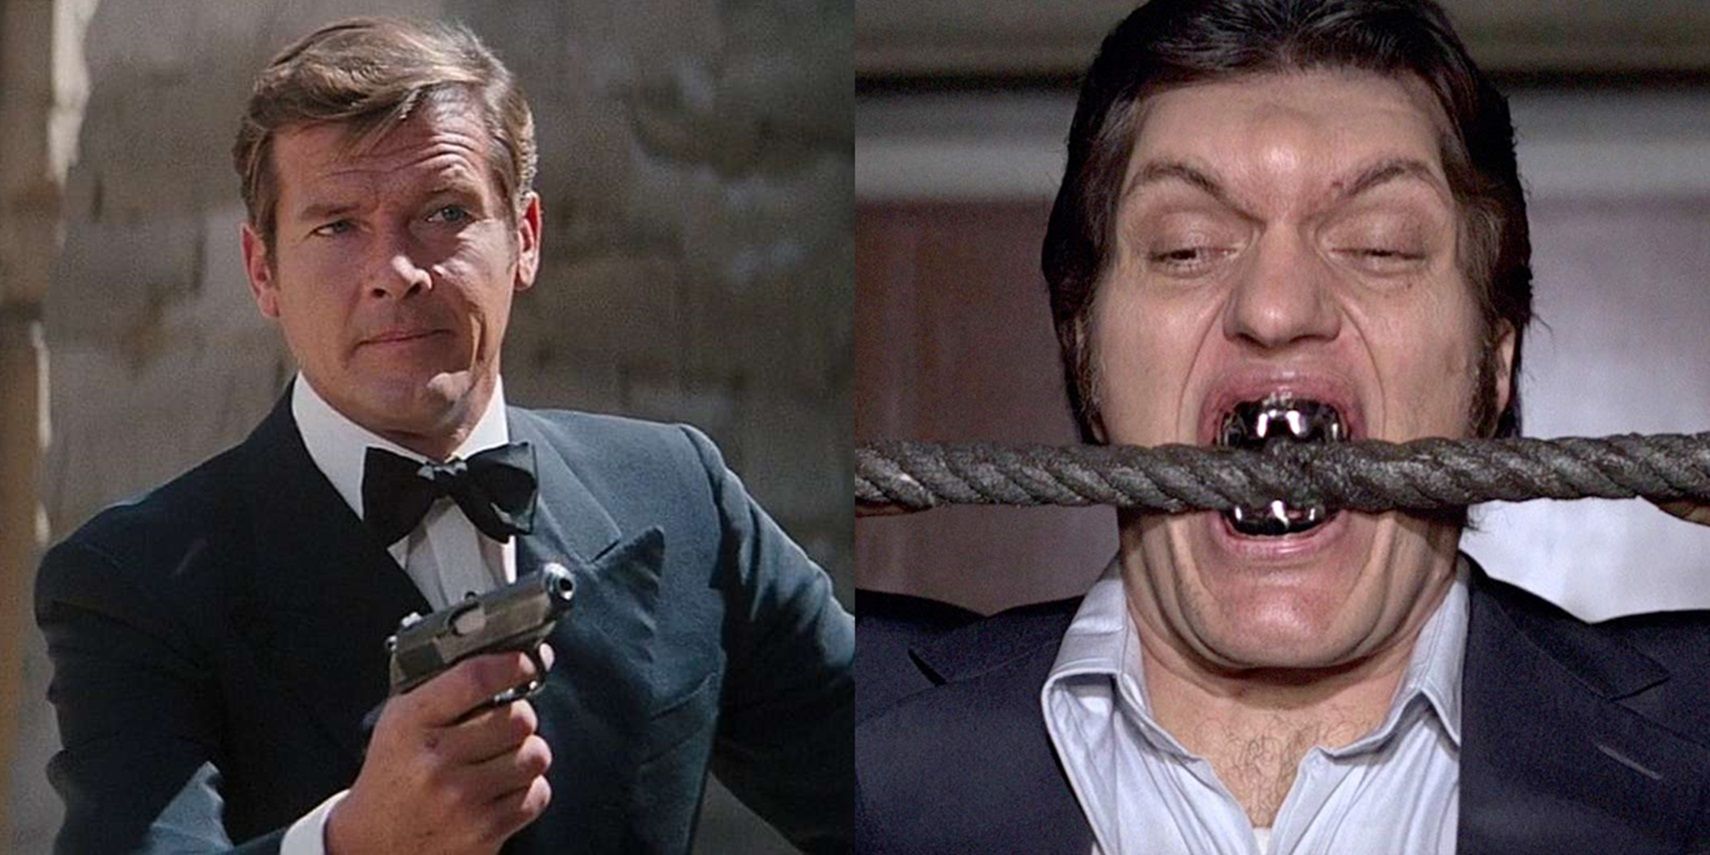 Roger Moore as James Bond holding a gun and Richard Kiel as Jaws biting a cable